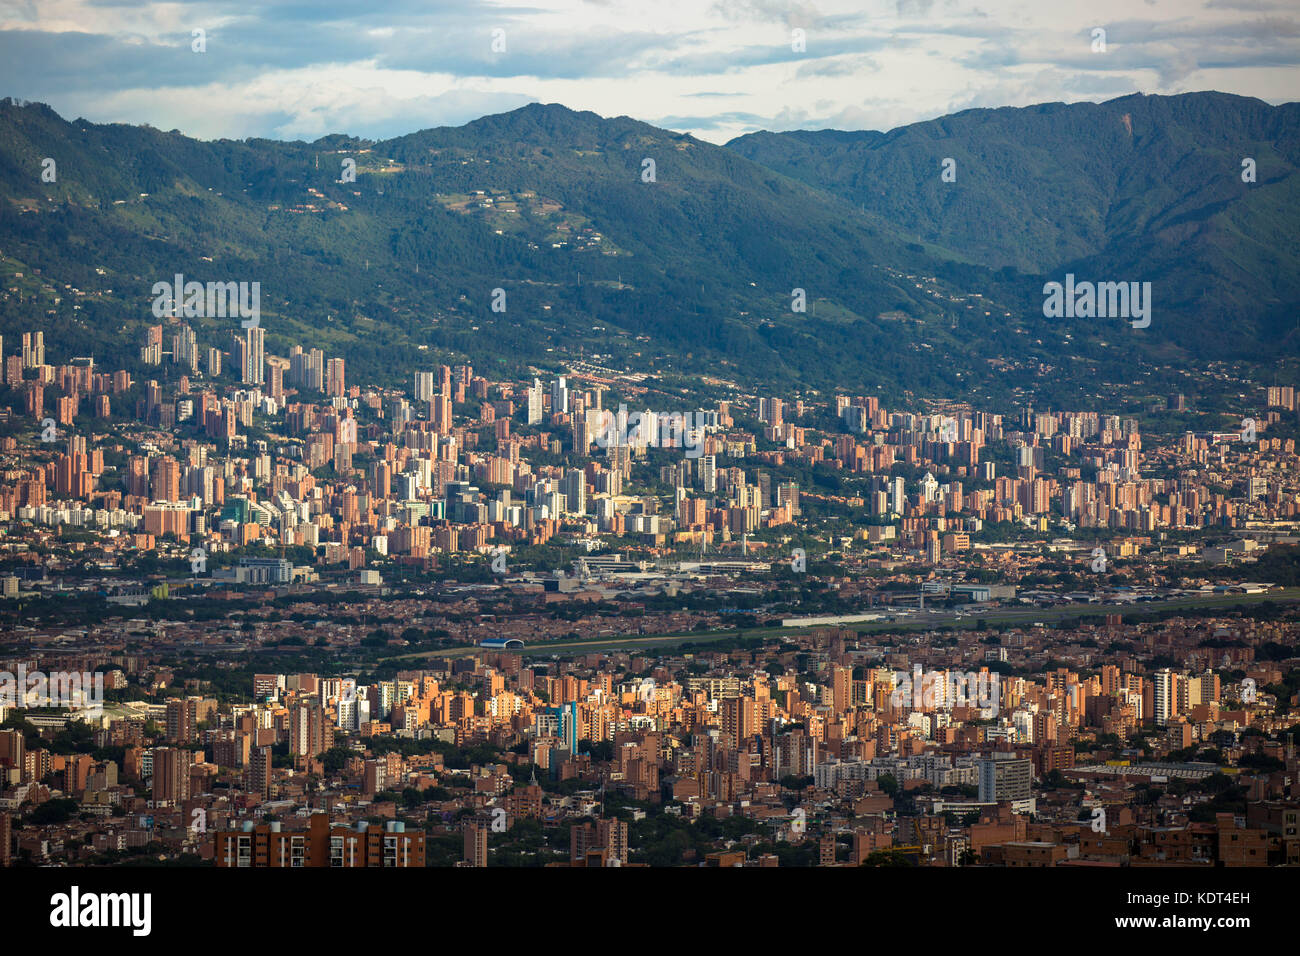 Medellin, Colombia's second largest city with 3 million people in the metropolitan area, has become synonymous with urban renewal. Stock Photo